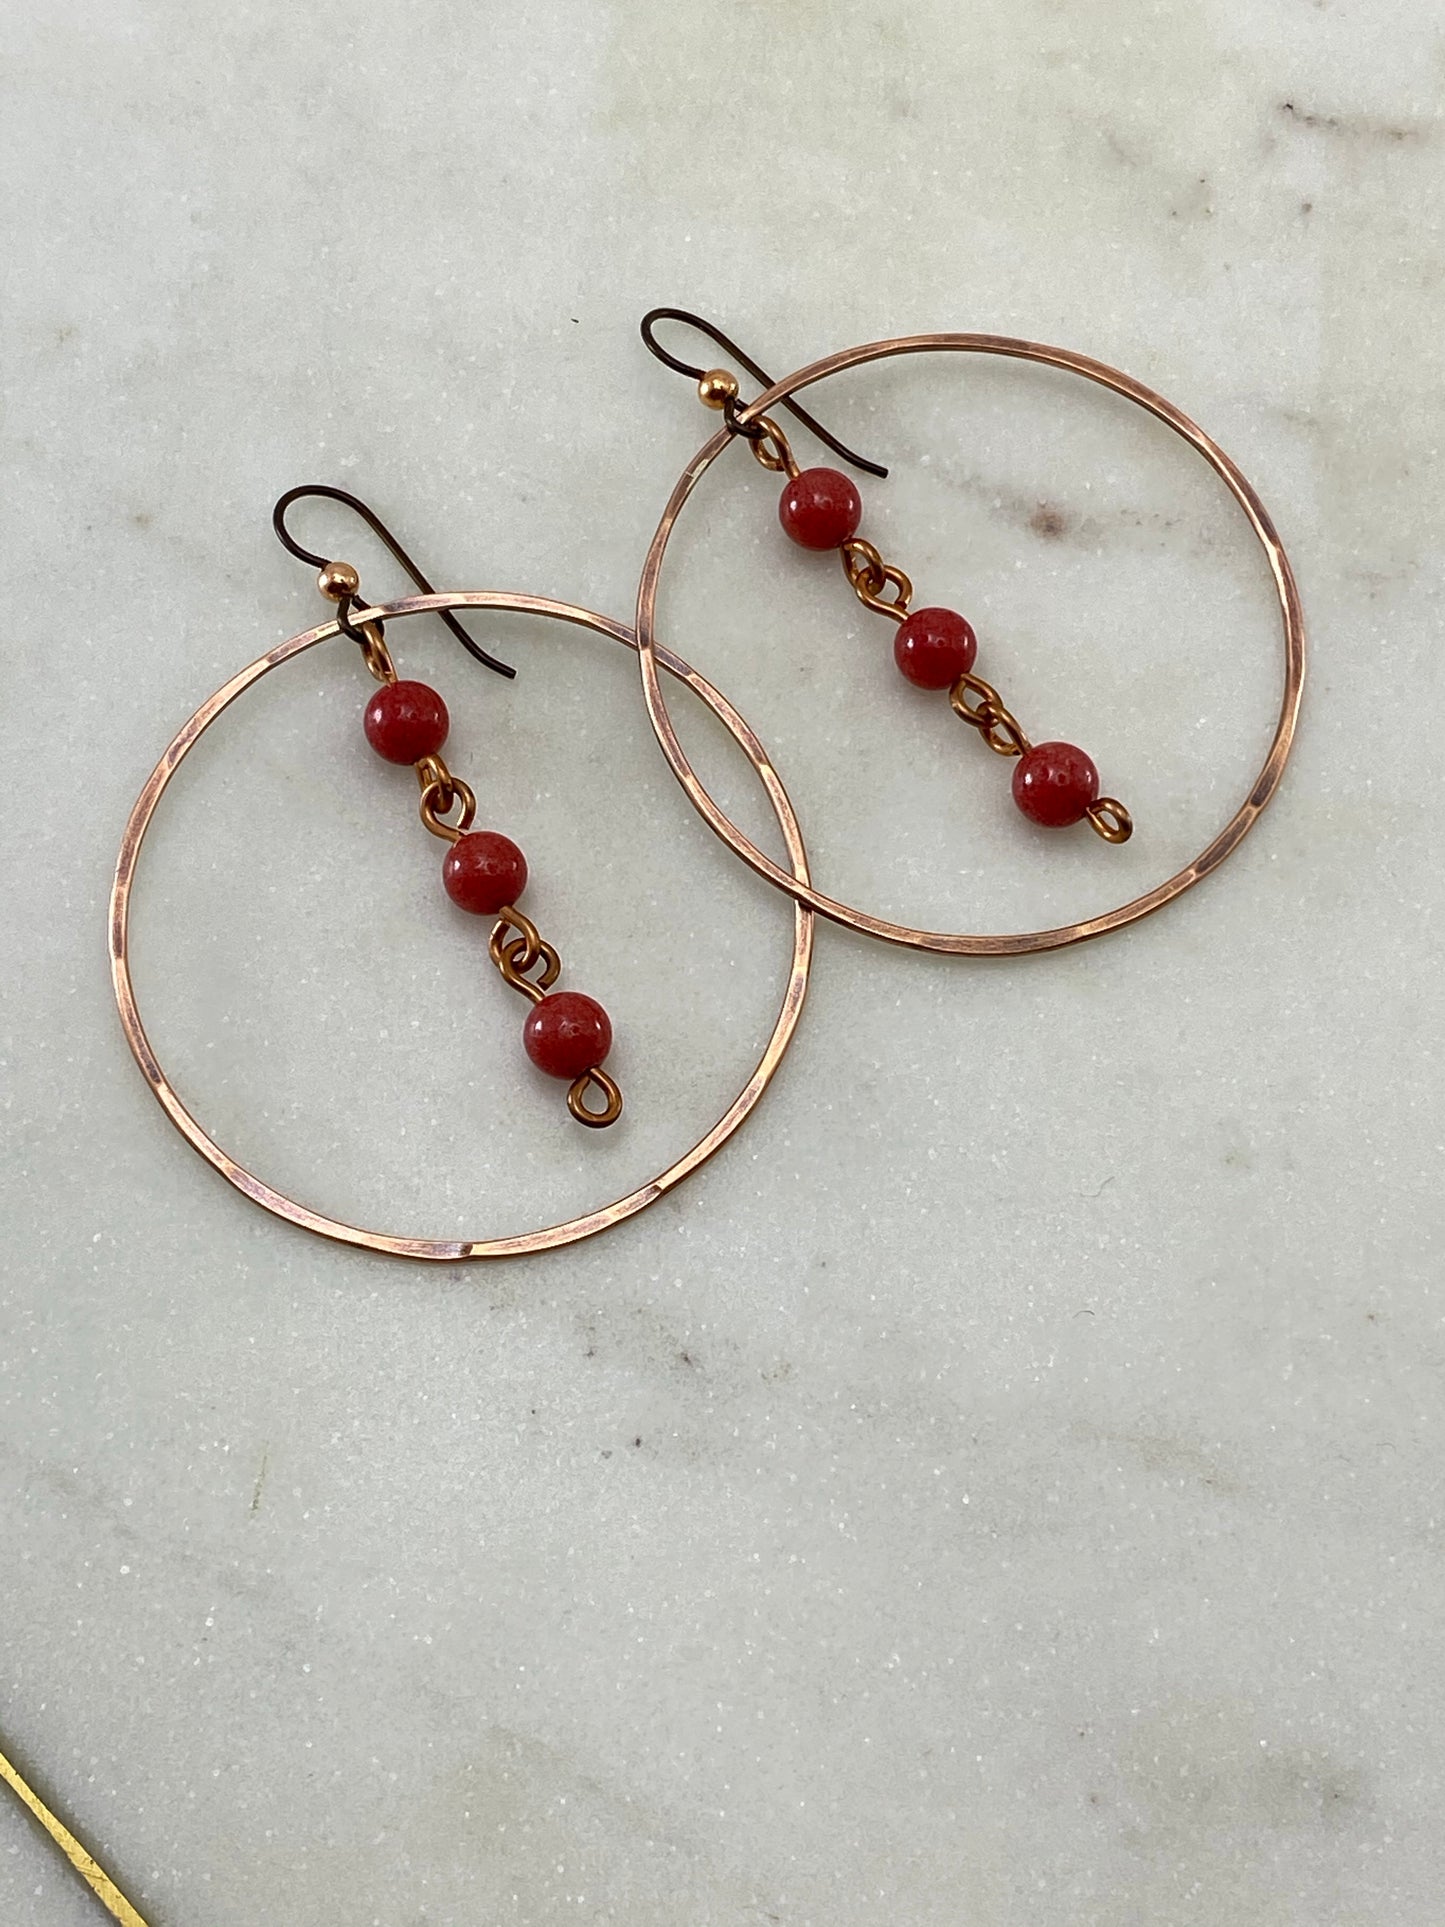 Forged copper earrings with coral